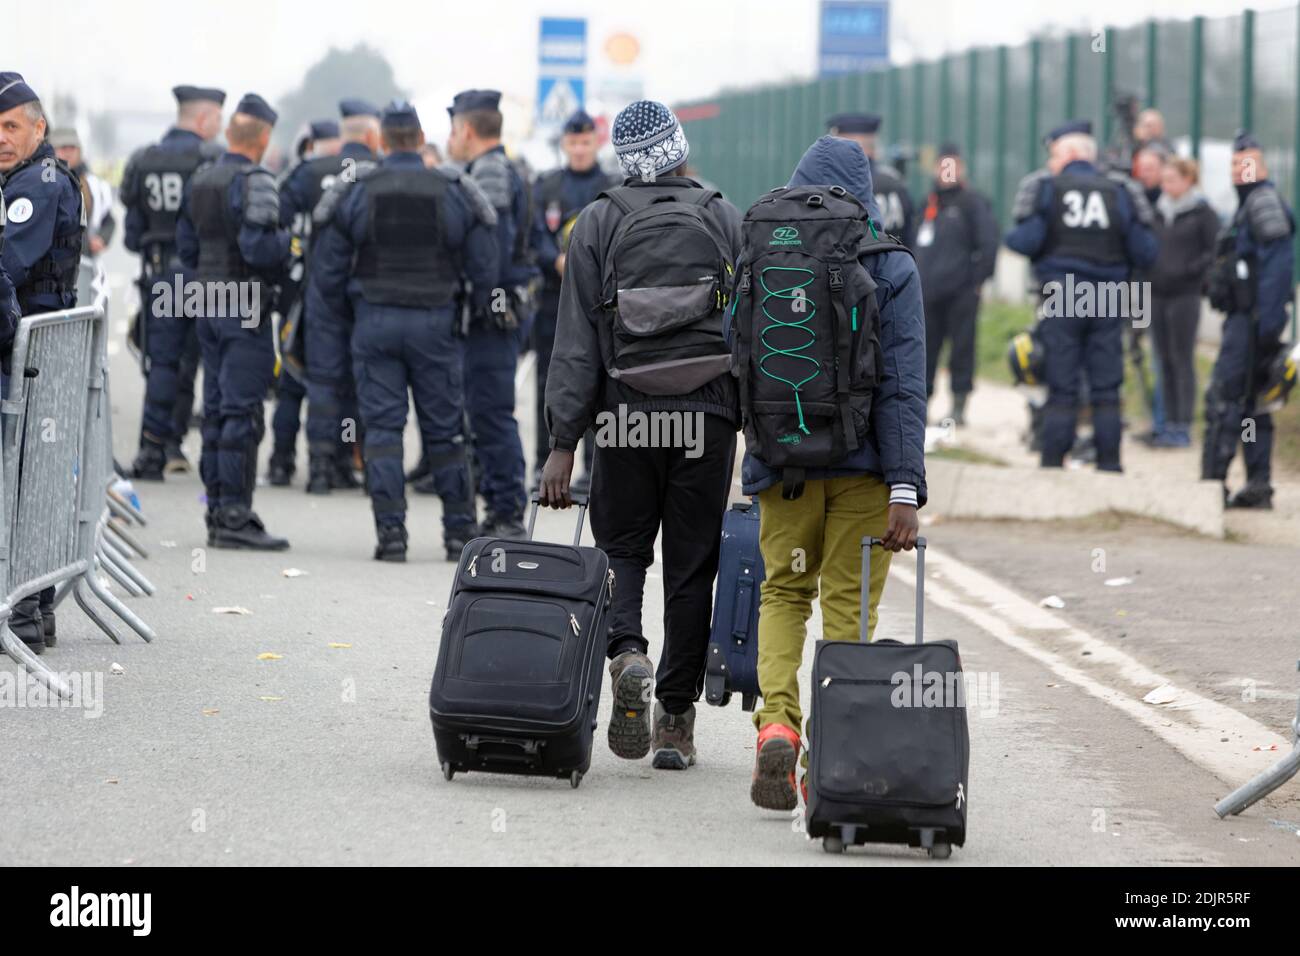 A coach carrying migrants leaves after they registered at a processing centre in 'the jungle' near Calais, northern France, as the mass exodus from the migrant camp begins. Calais, France, Monday October 24, 2016. Police vans and fire engines had gathered on the perimeter of the rat-infested slum as migrants and refugees queued in the dark to register for accommodation centres elsewhere in France after being told they must leave the camp or risk arrest and deportation. Photo by Sylvain Lefevre/ABACAPRESS.COM Stock Photo